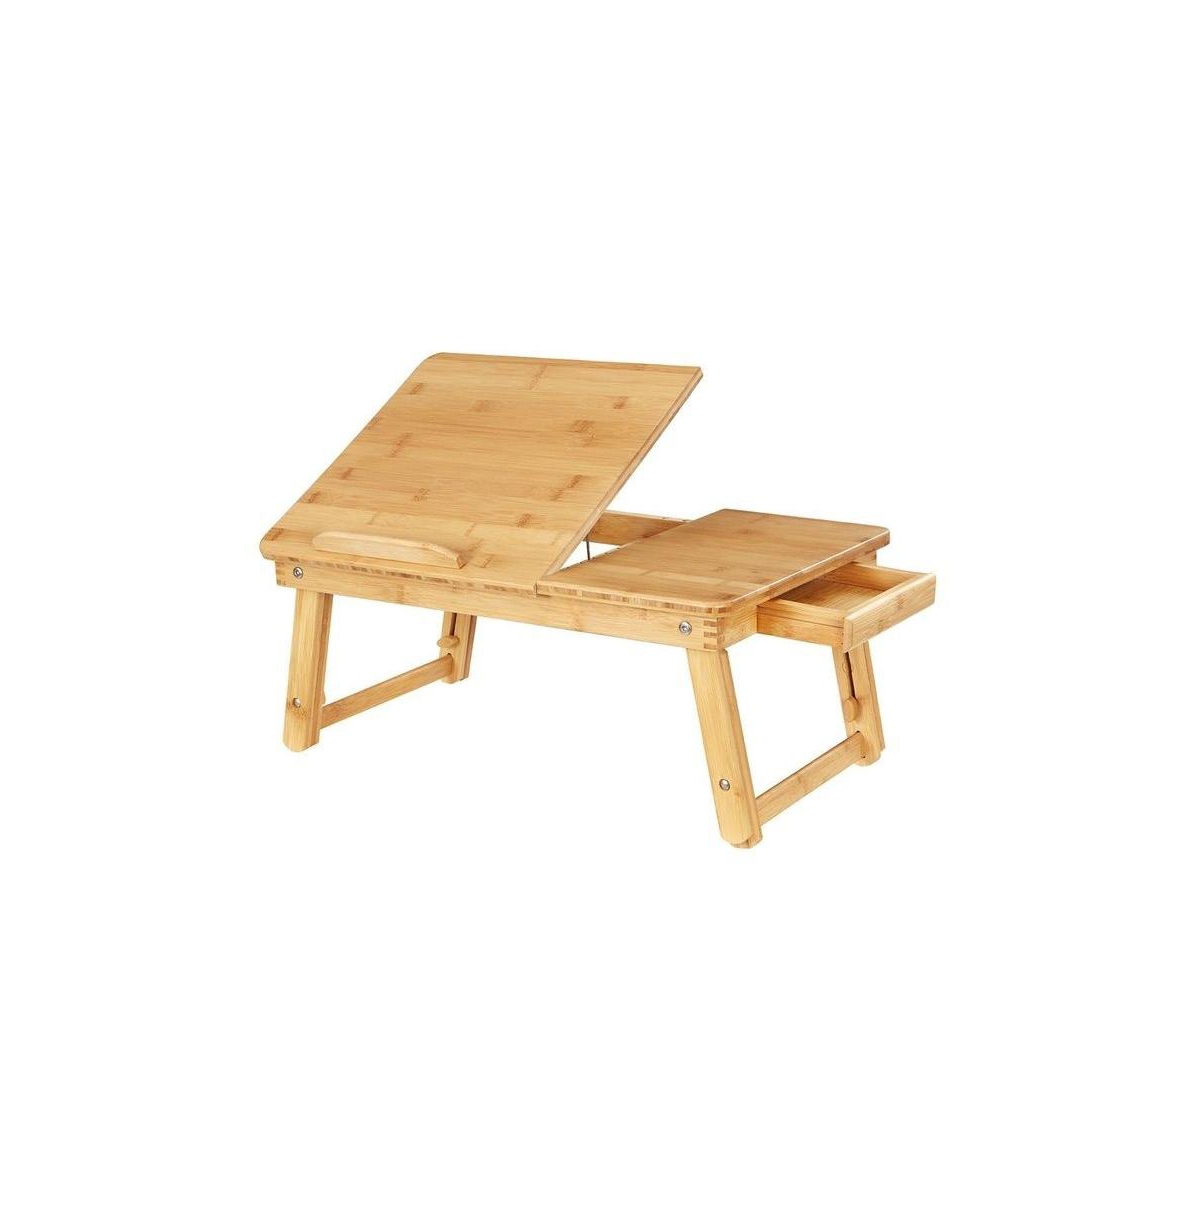 Multi Function Lapdesk Table Bed Tray Foldable Adjustable Breakfast Table - Natural